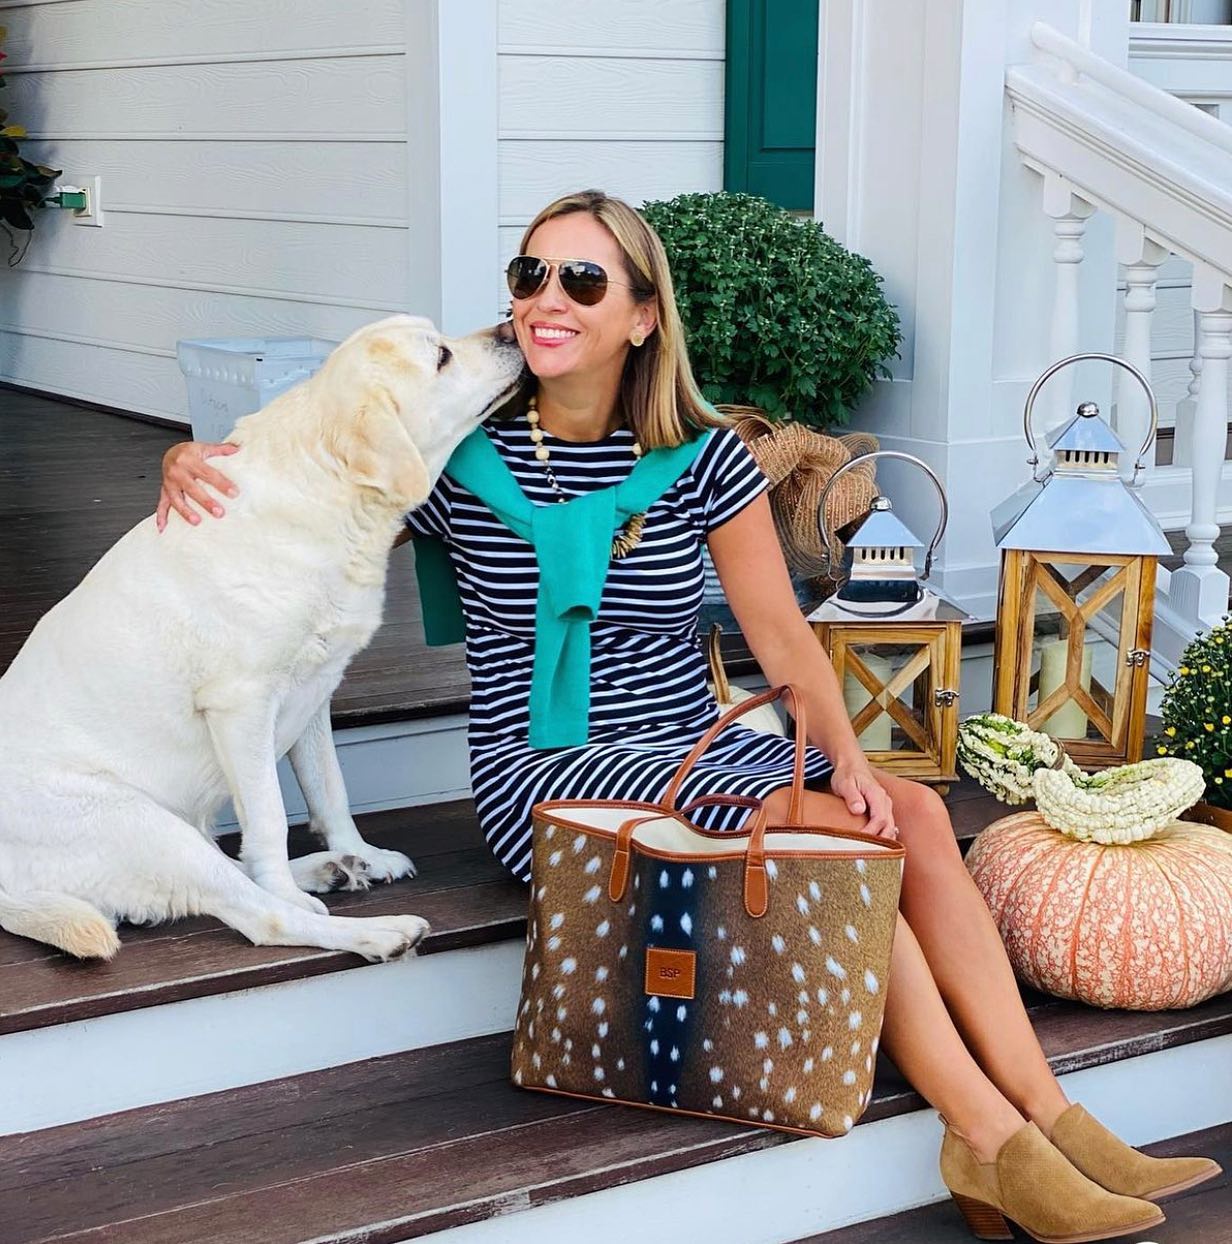 Relaxed autumn vibe with a woman in a striped dress and a dog, complemented by a unique personalized handbag